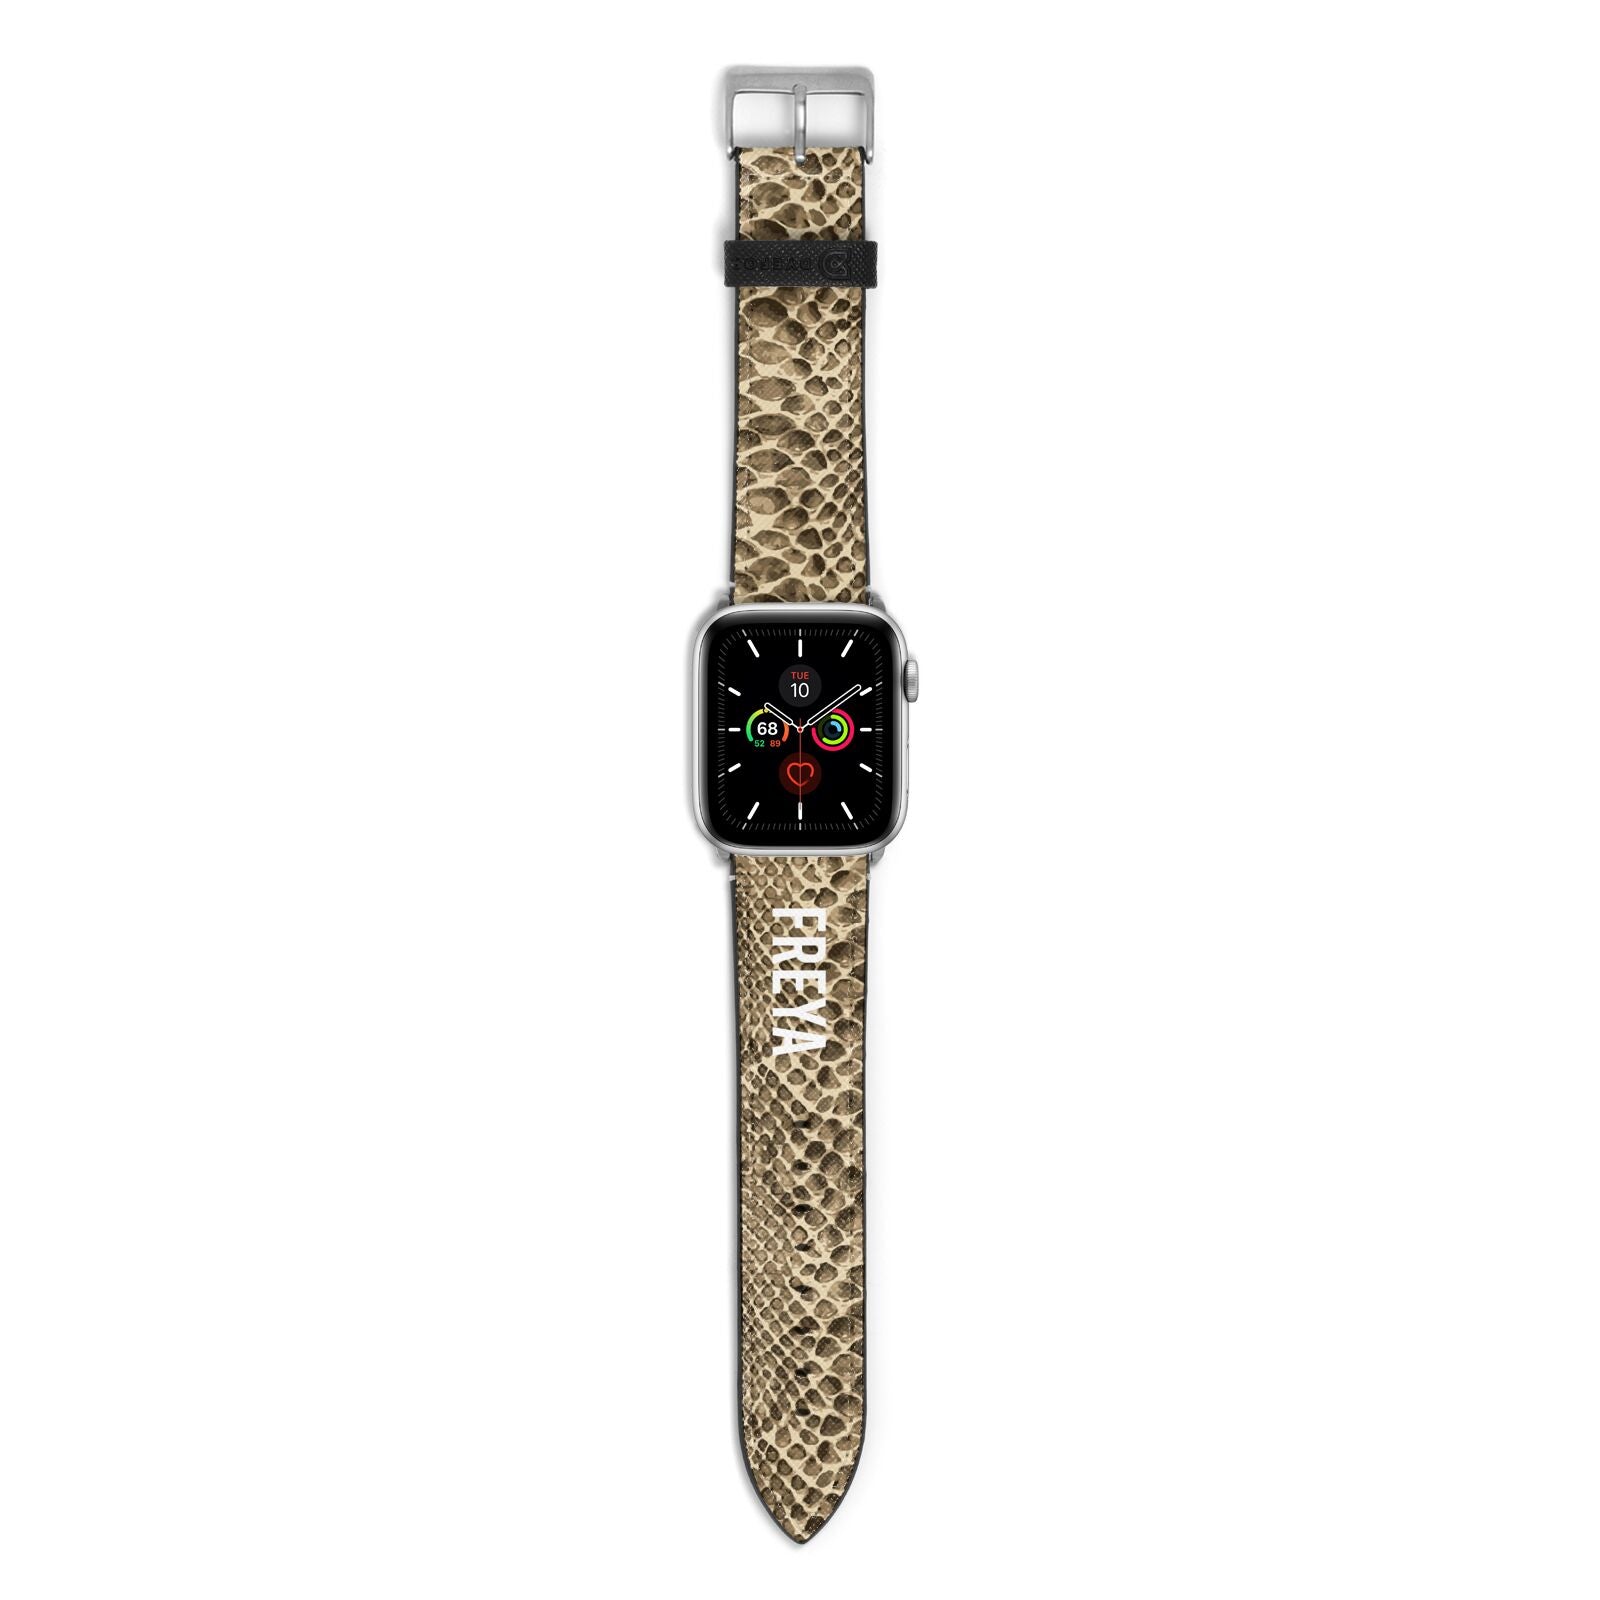 Personalised Tan Snakeskin Apple Watch Strap with Silver Hardware